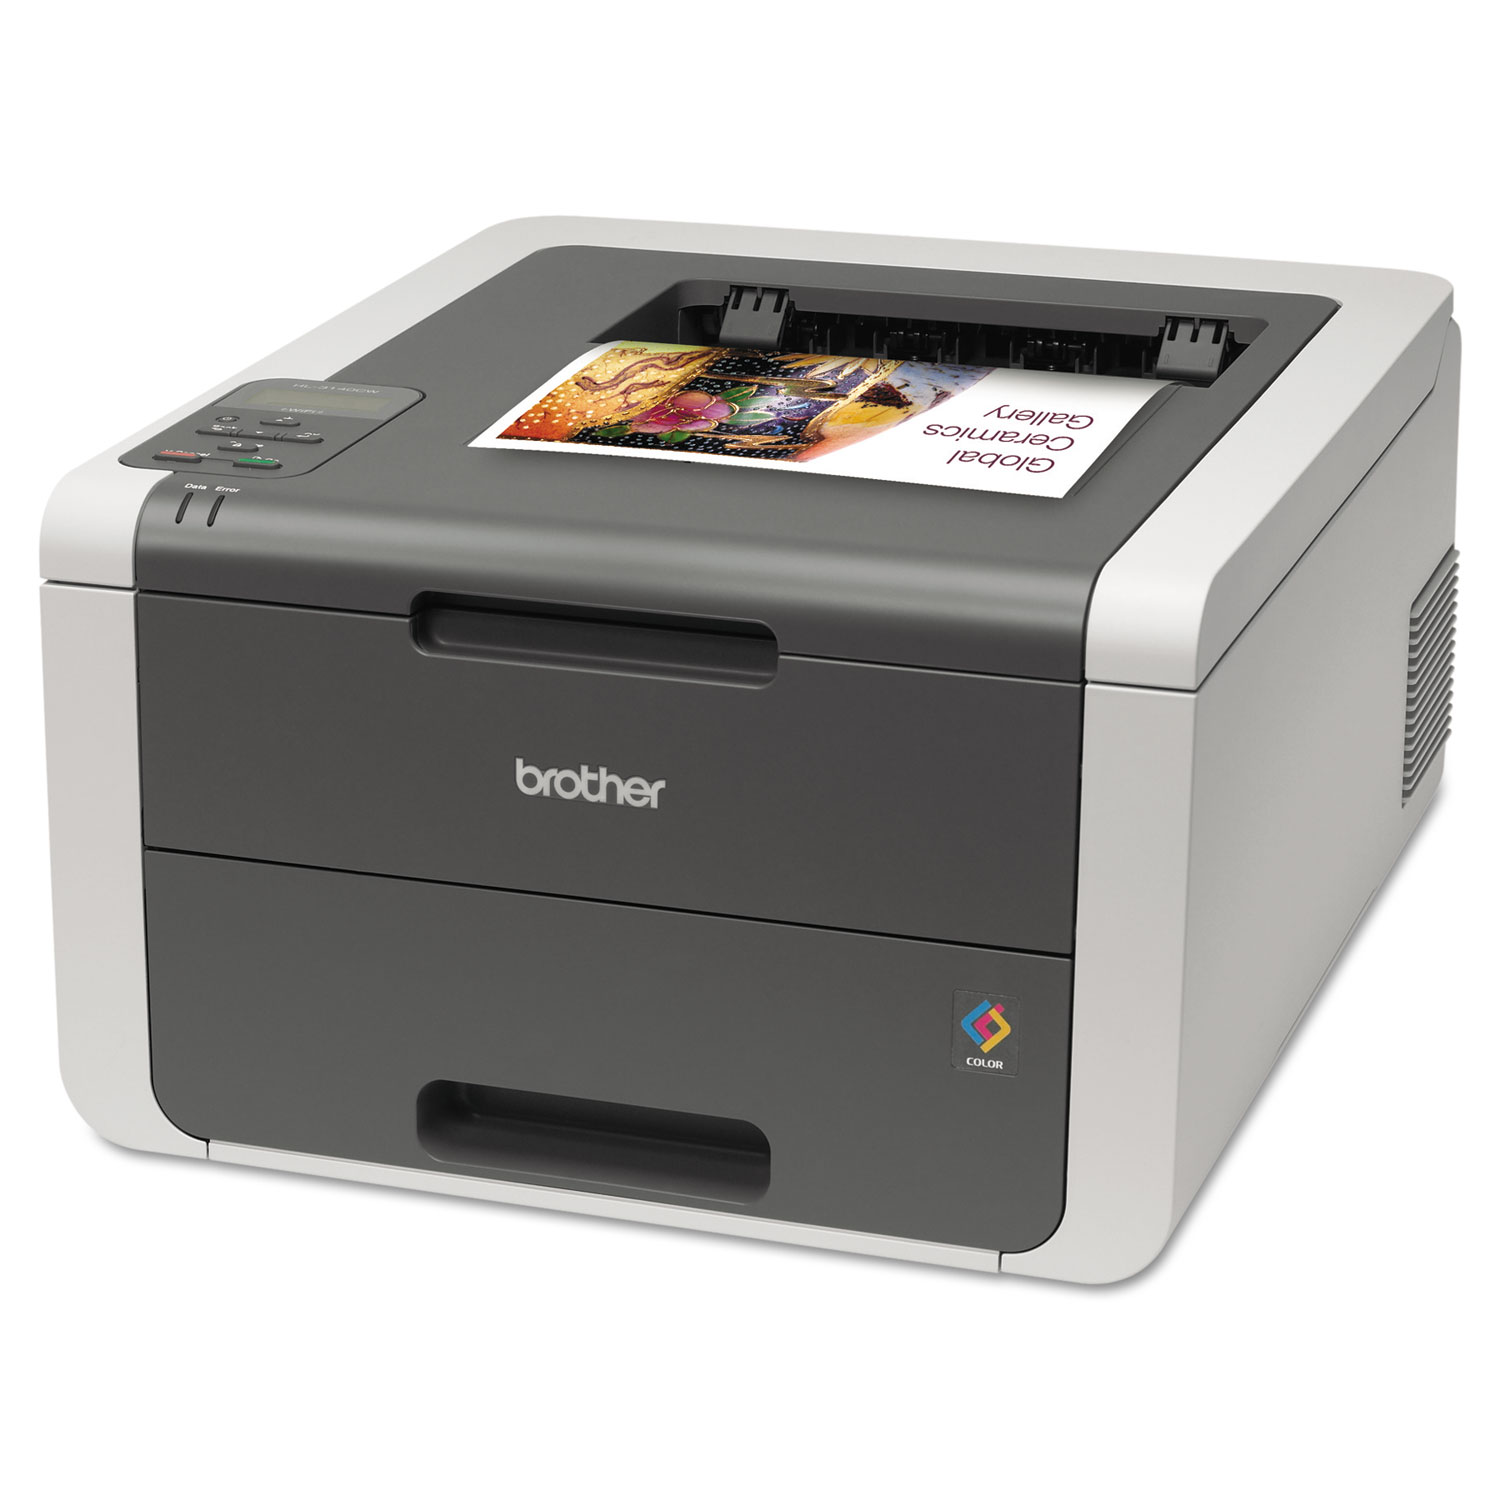 HL-3140CW Digital Color Printer with Wireless Networking